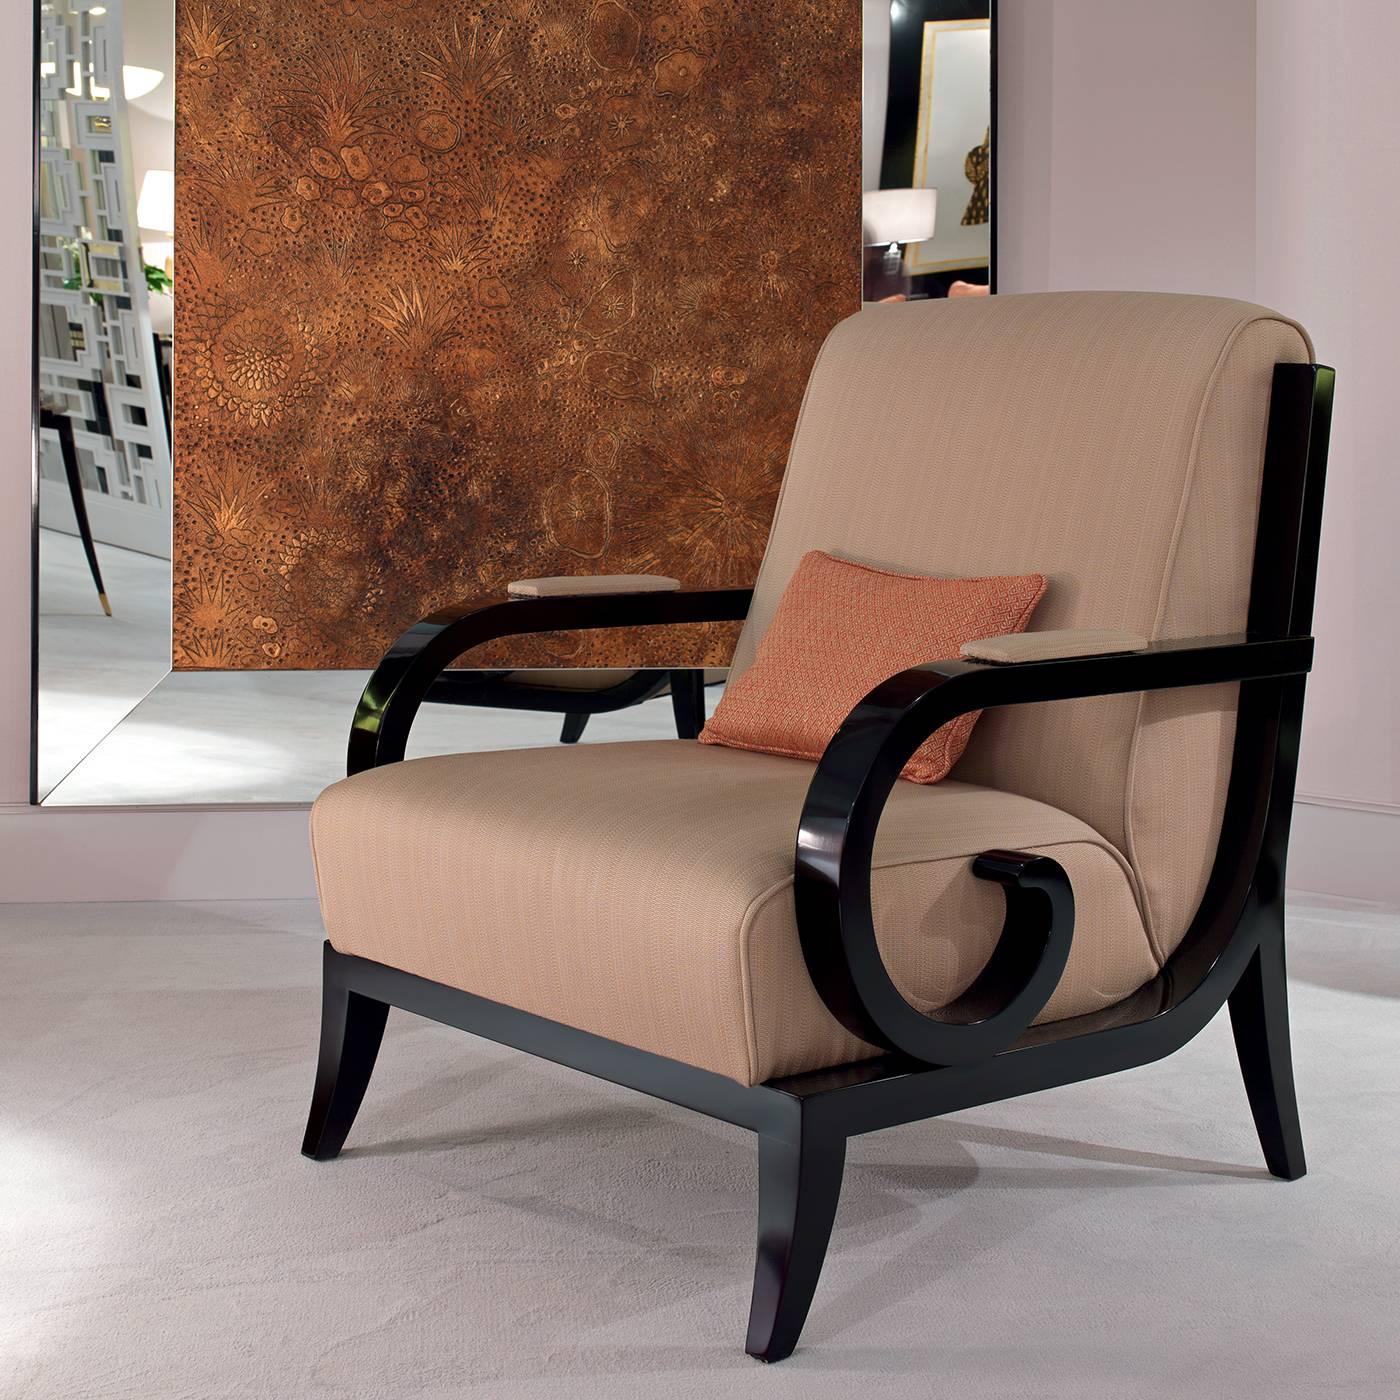 This elegant armchair was entirely made in solid wood according to artisanal methods. The wood was then polished in a striking black glossy finish that highlights its straight vertical elements and the gentle curves of its armrest and feet. The